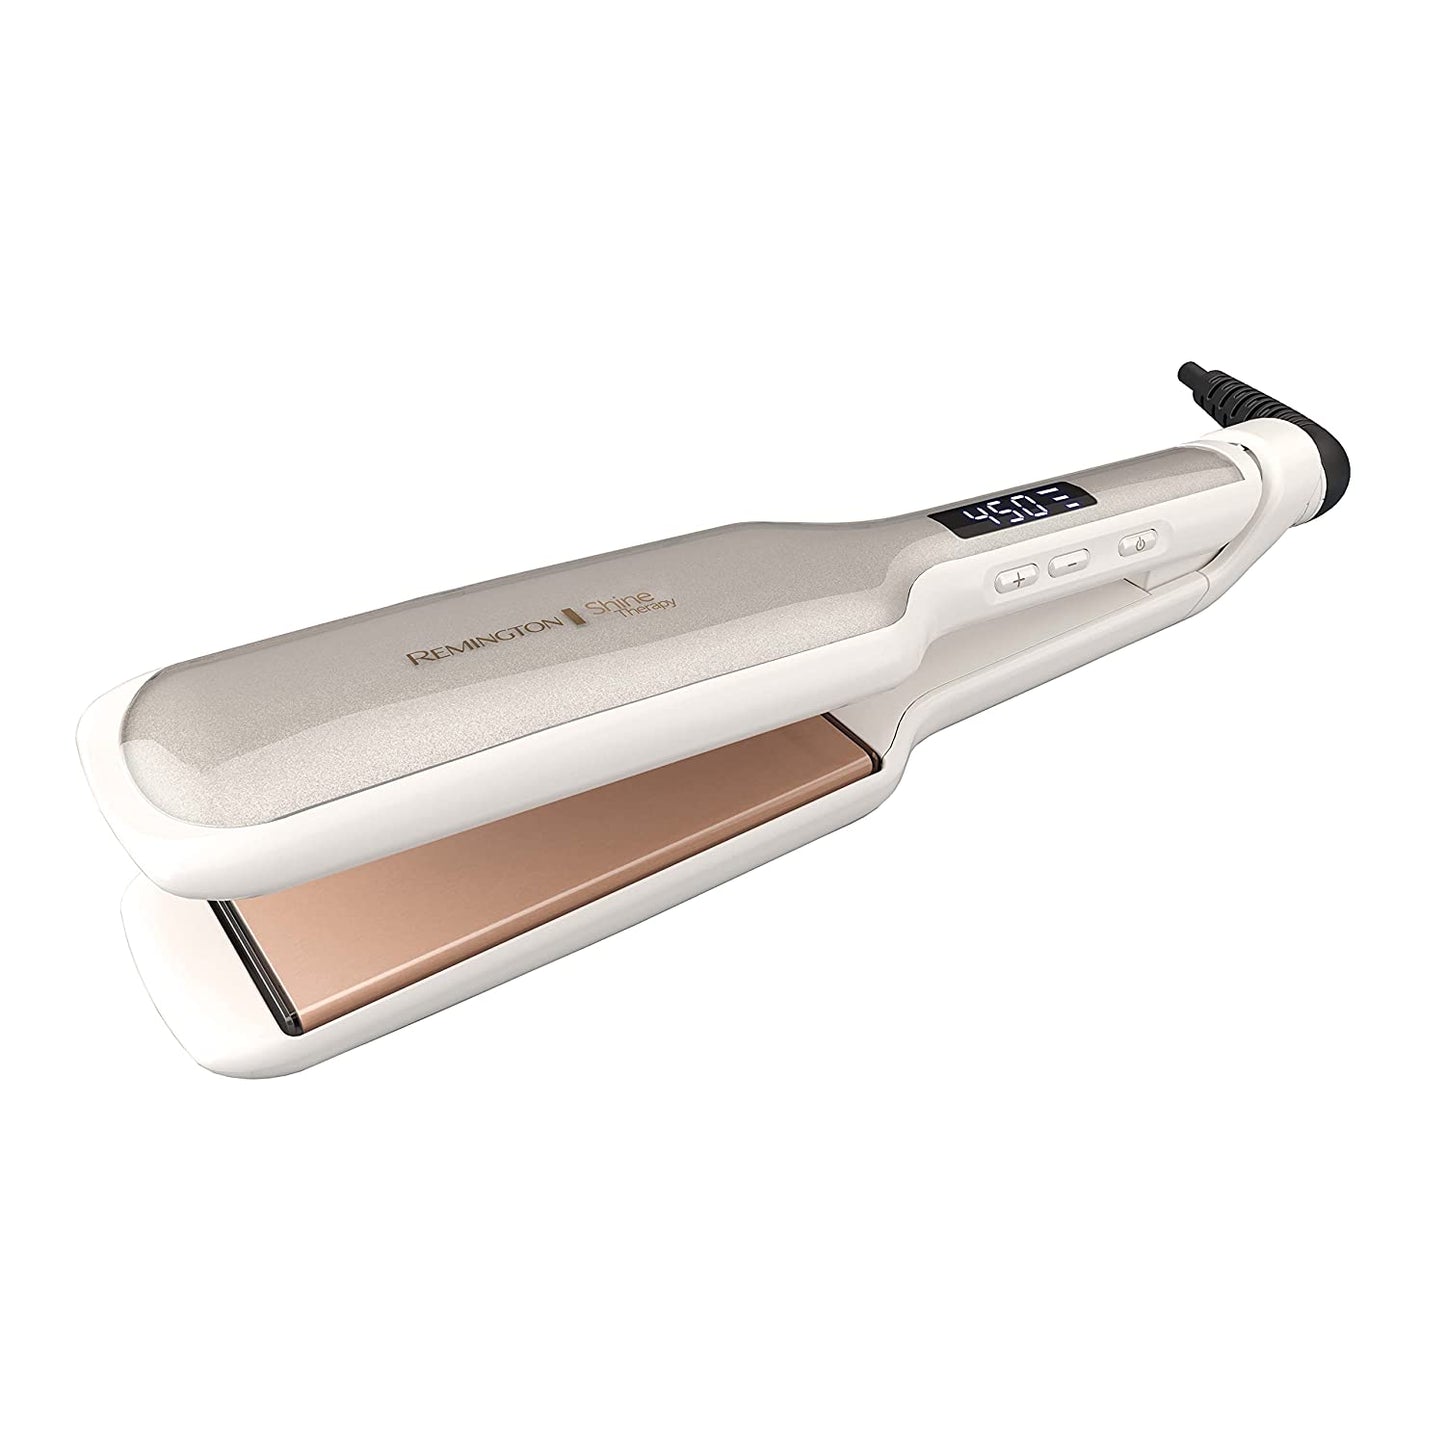 Spring Shine Therapy 2 Inch Hair Straightener Iron